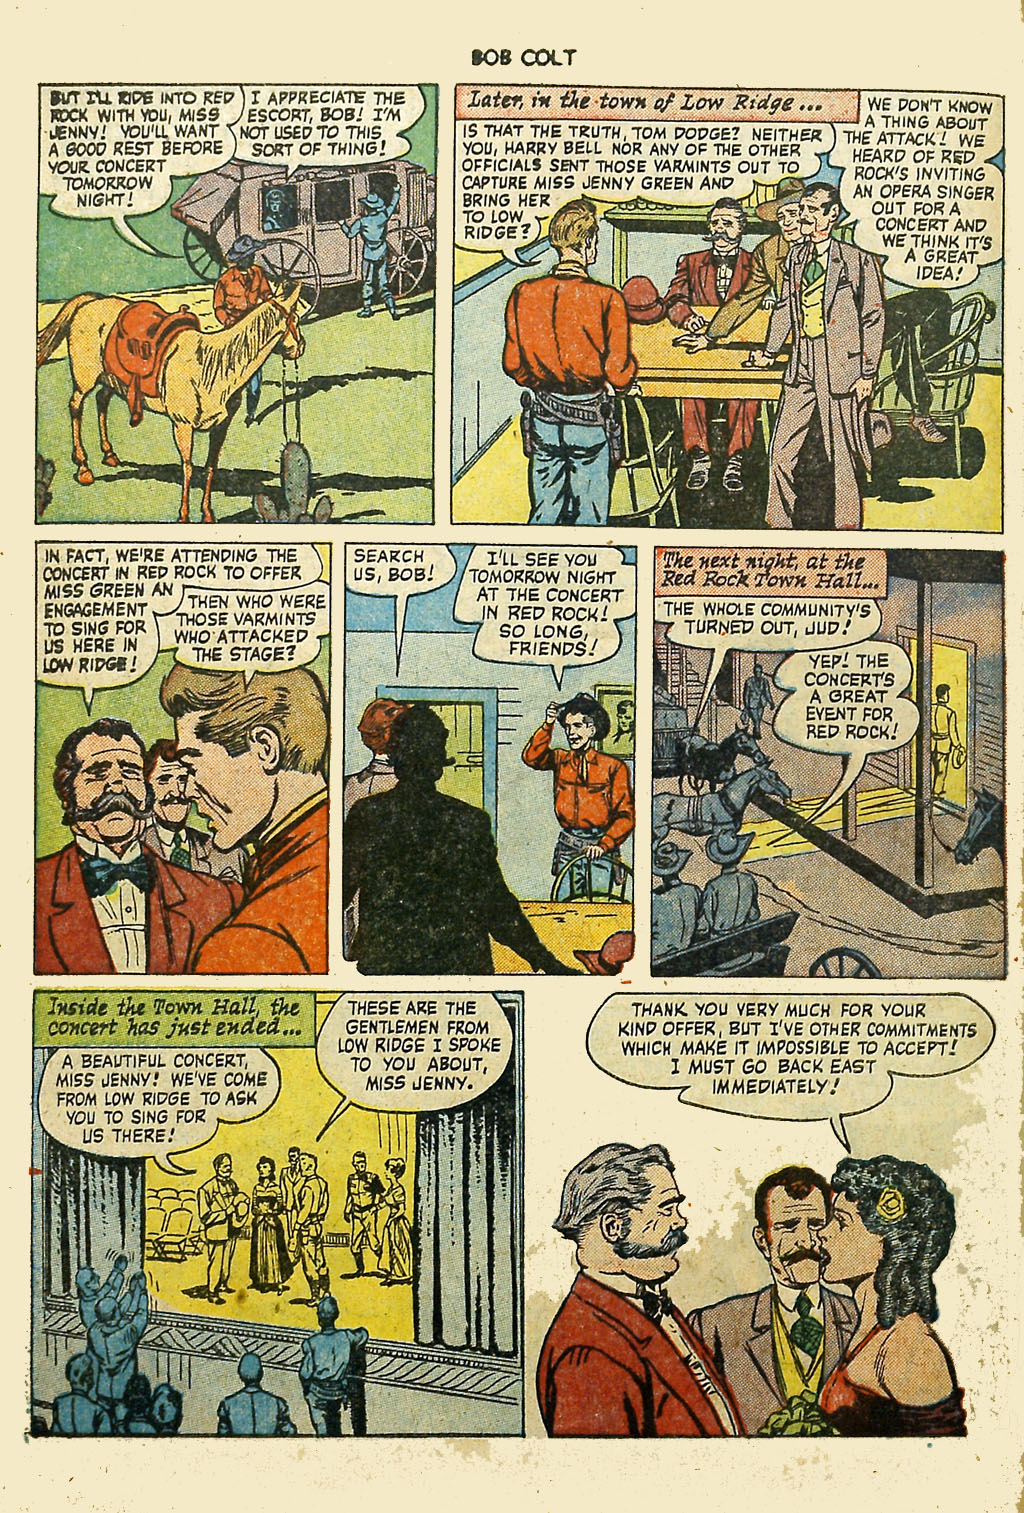 Read online Bob Colt Western comic -  Issue #2 - 30